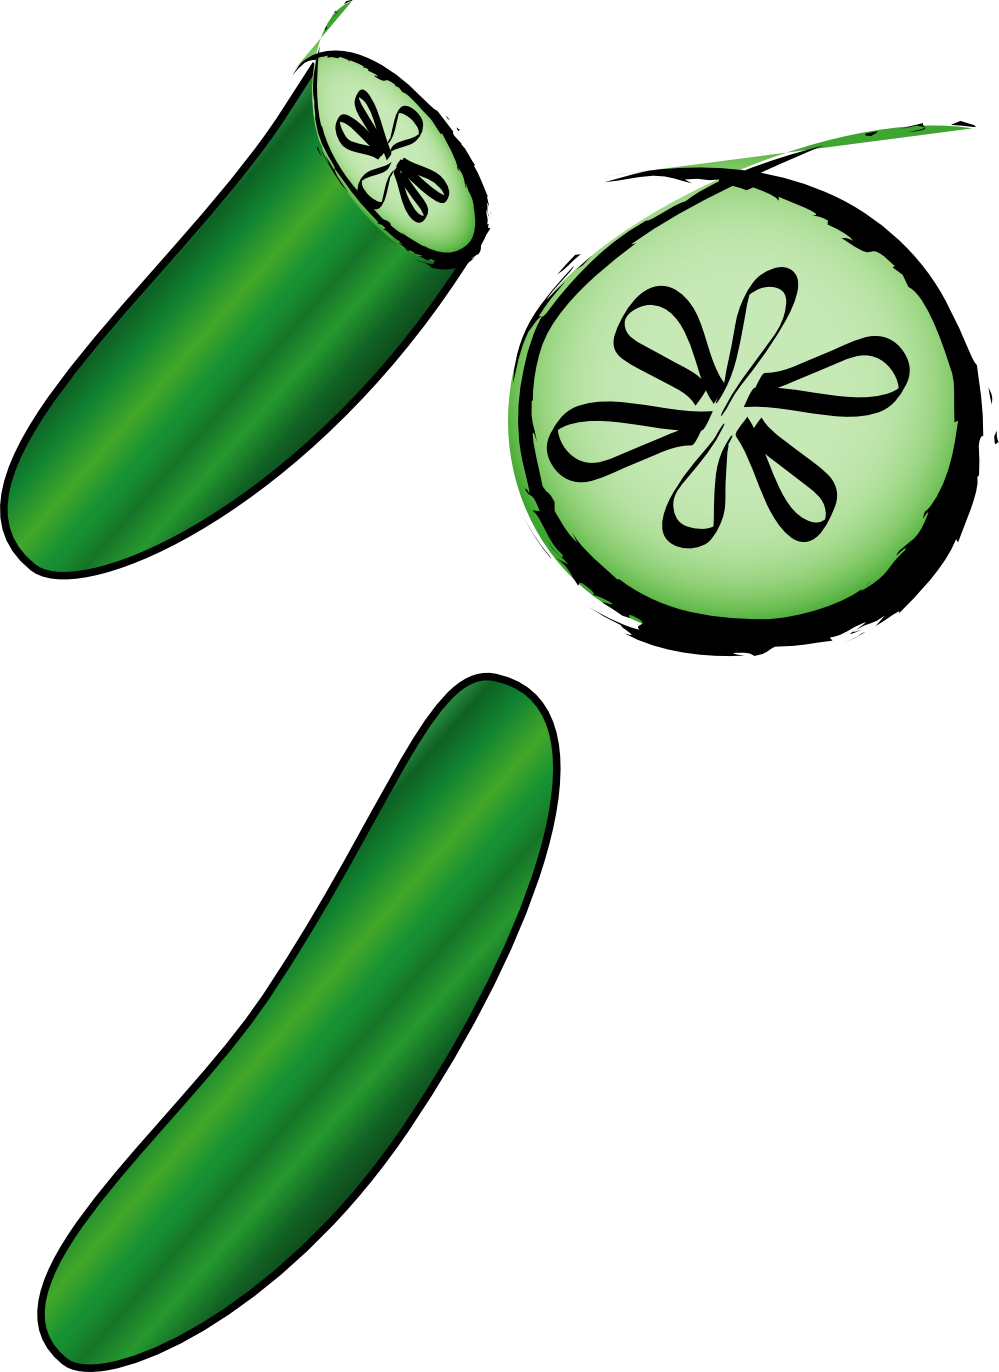 Cucumber Slice PNG Black And White - 134610